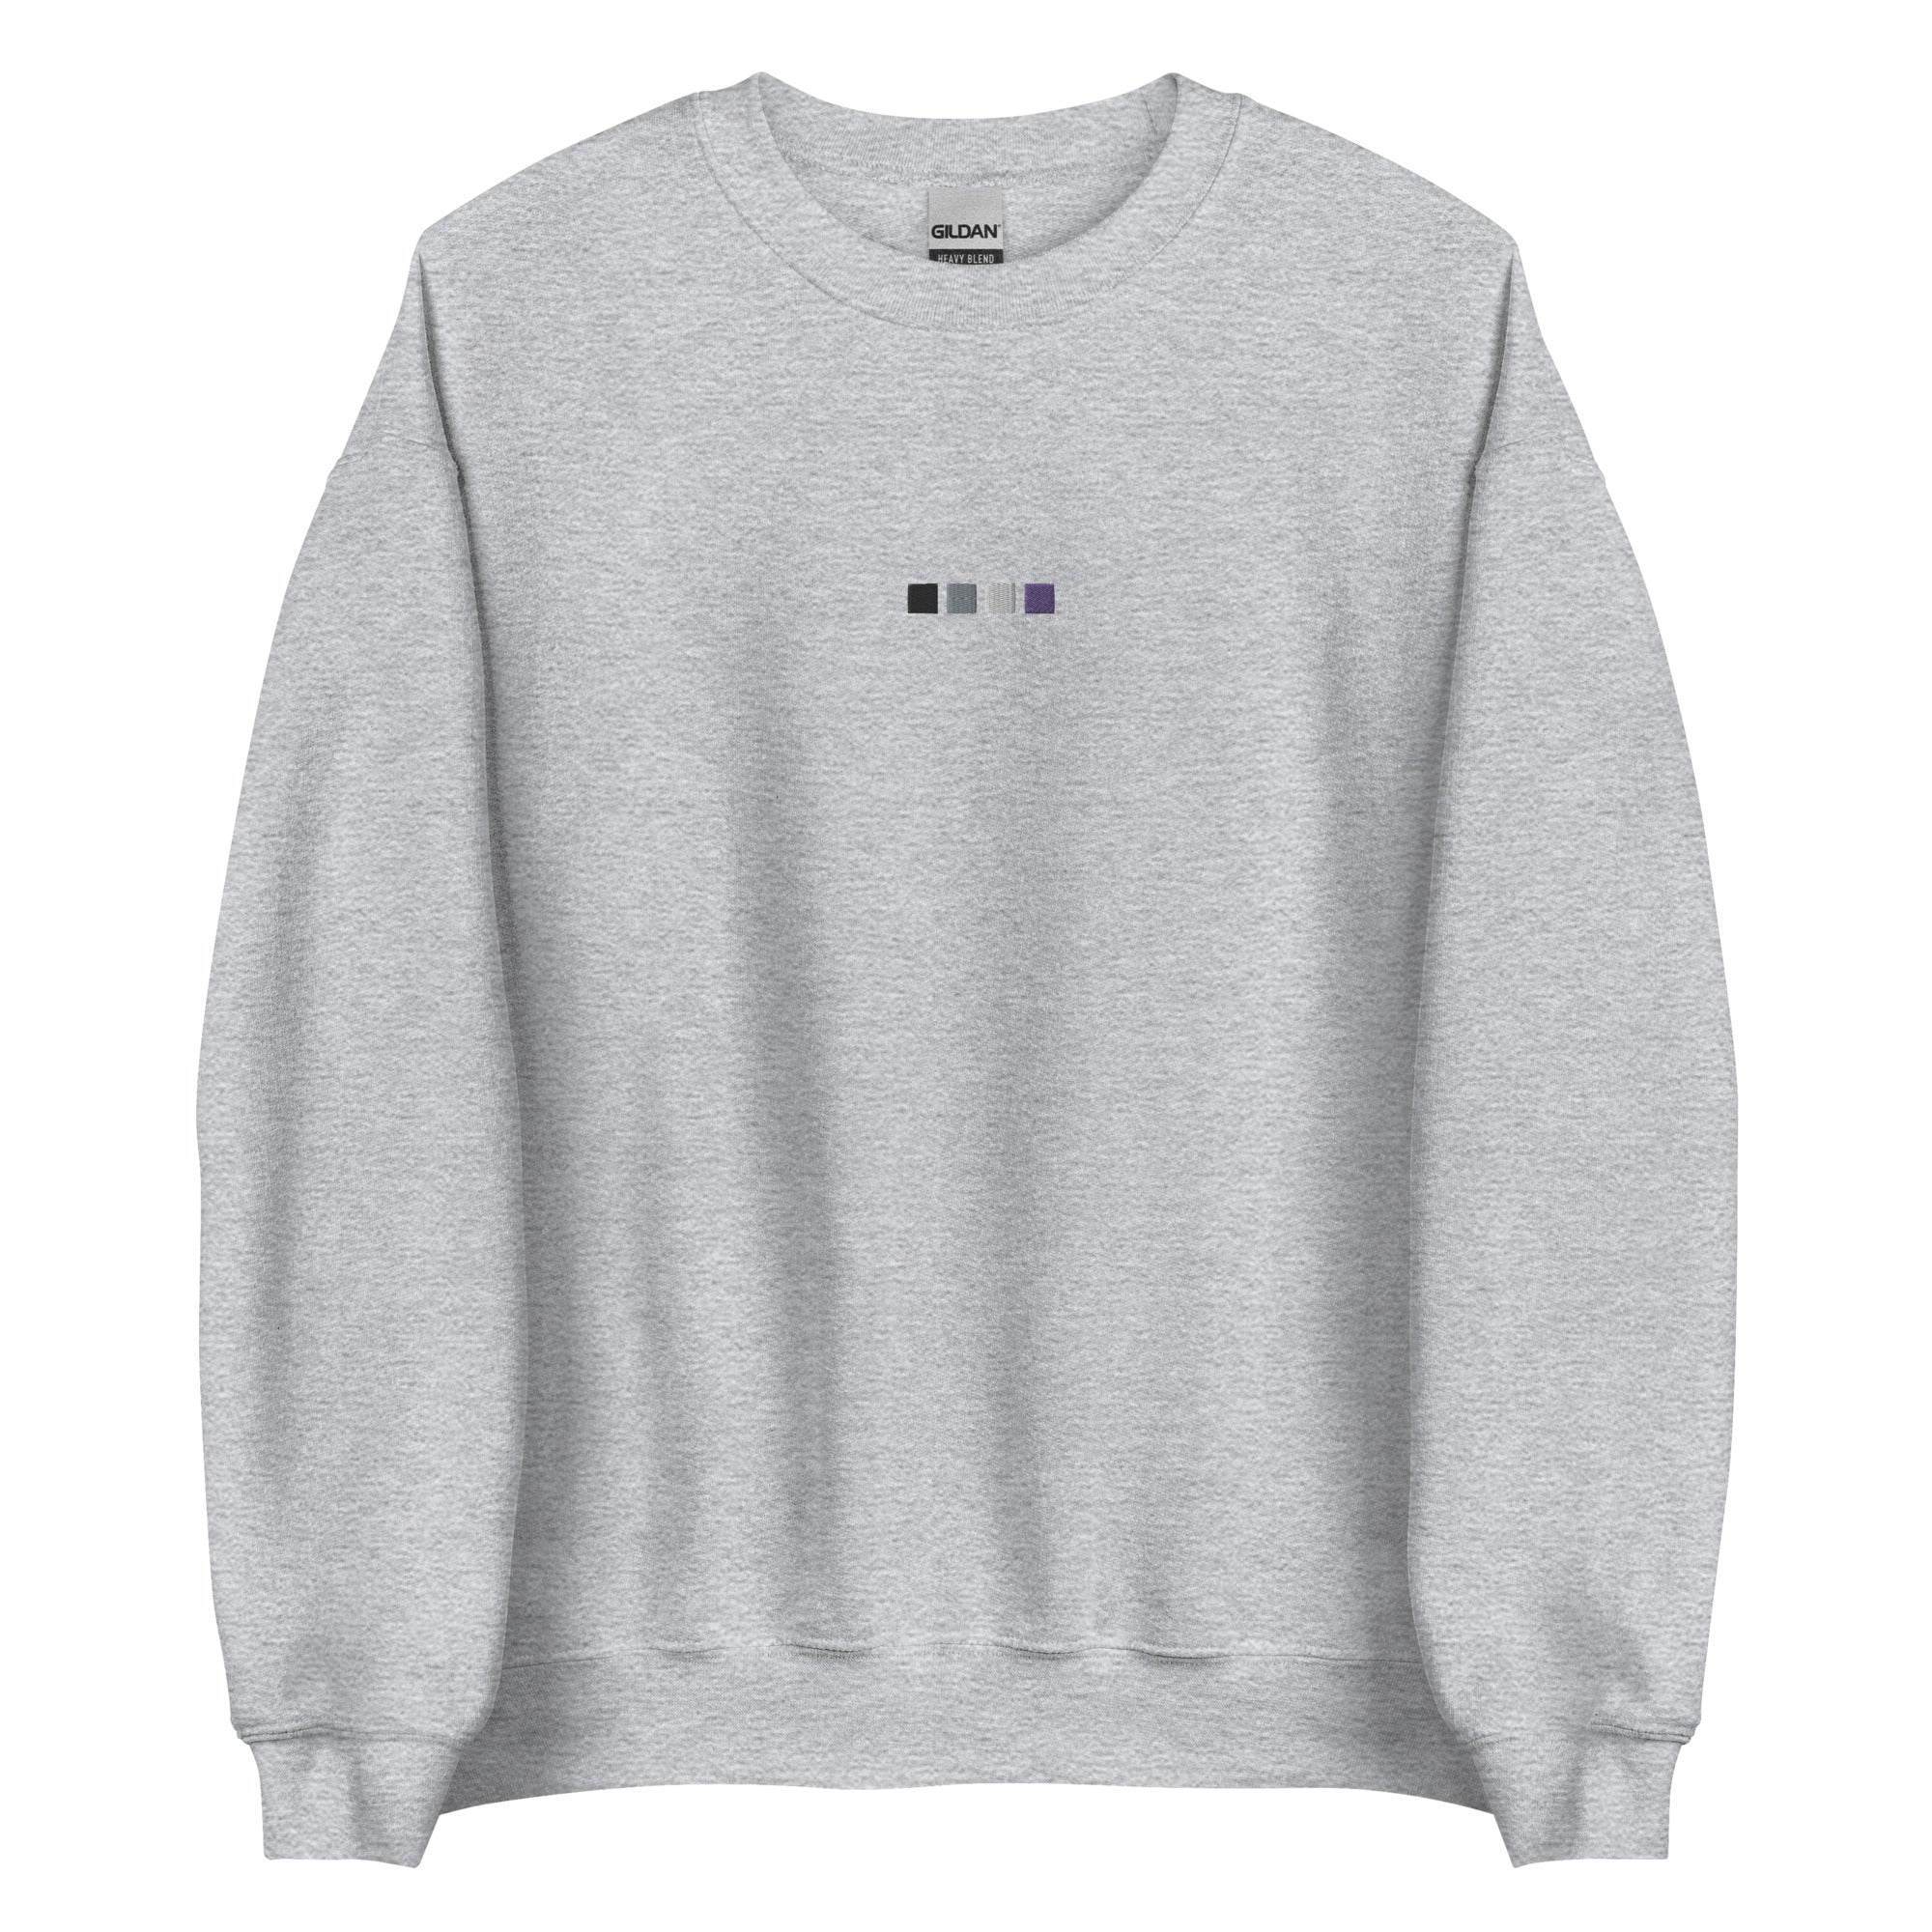 Asexual Squares Embroidered Unisex Sweatshirt